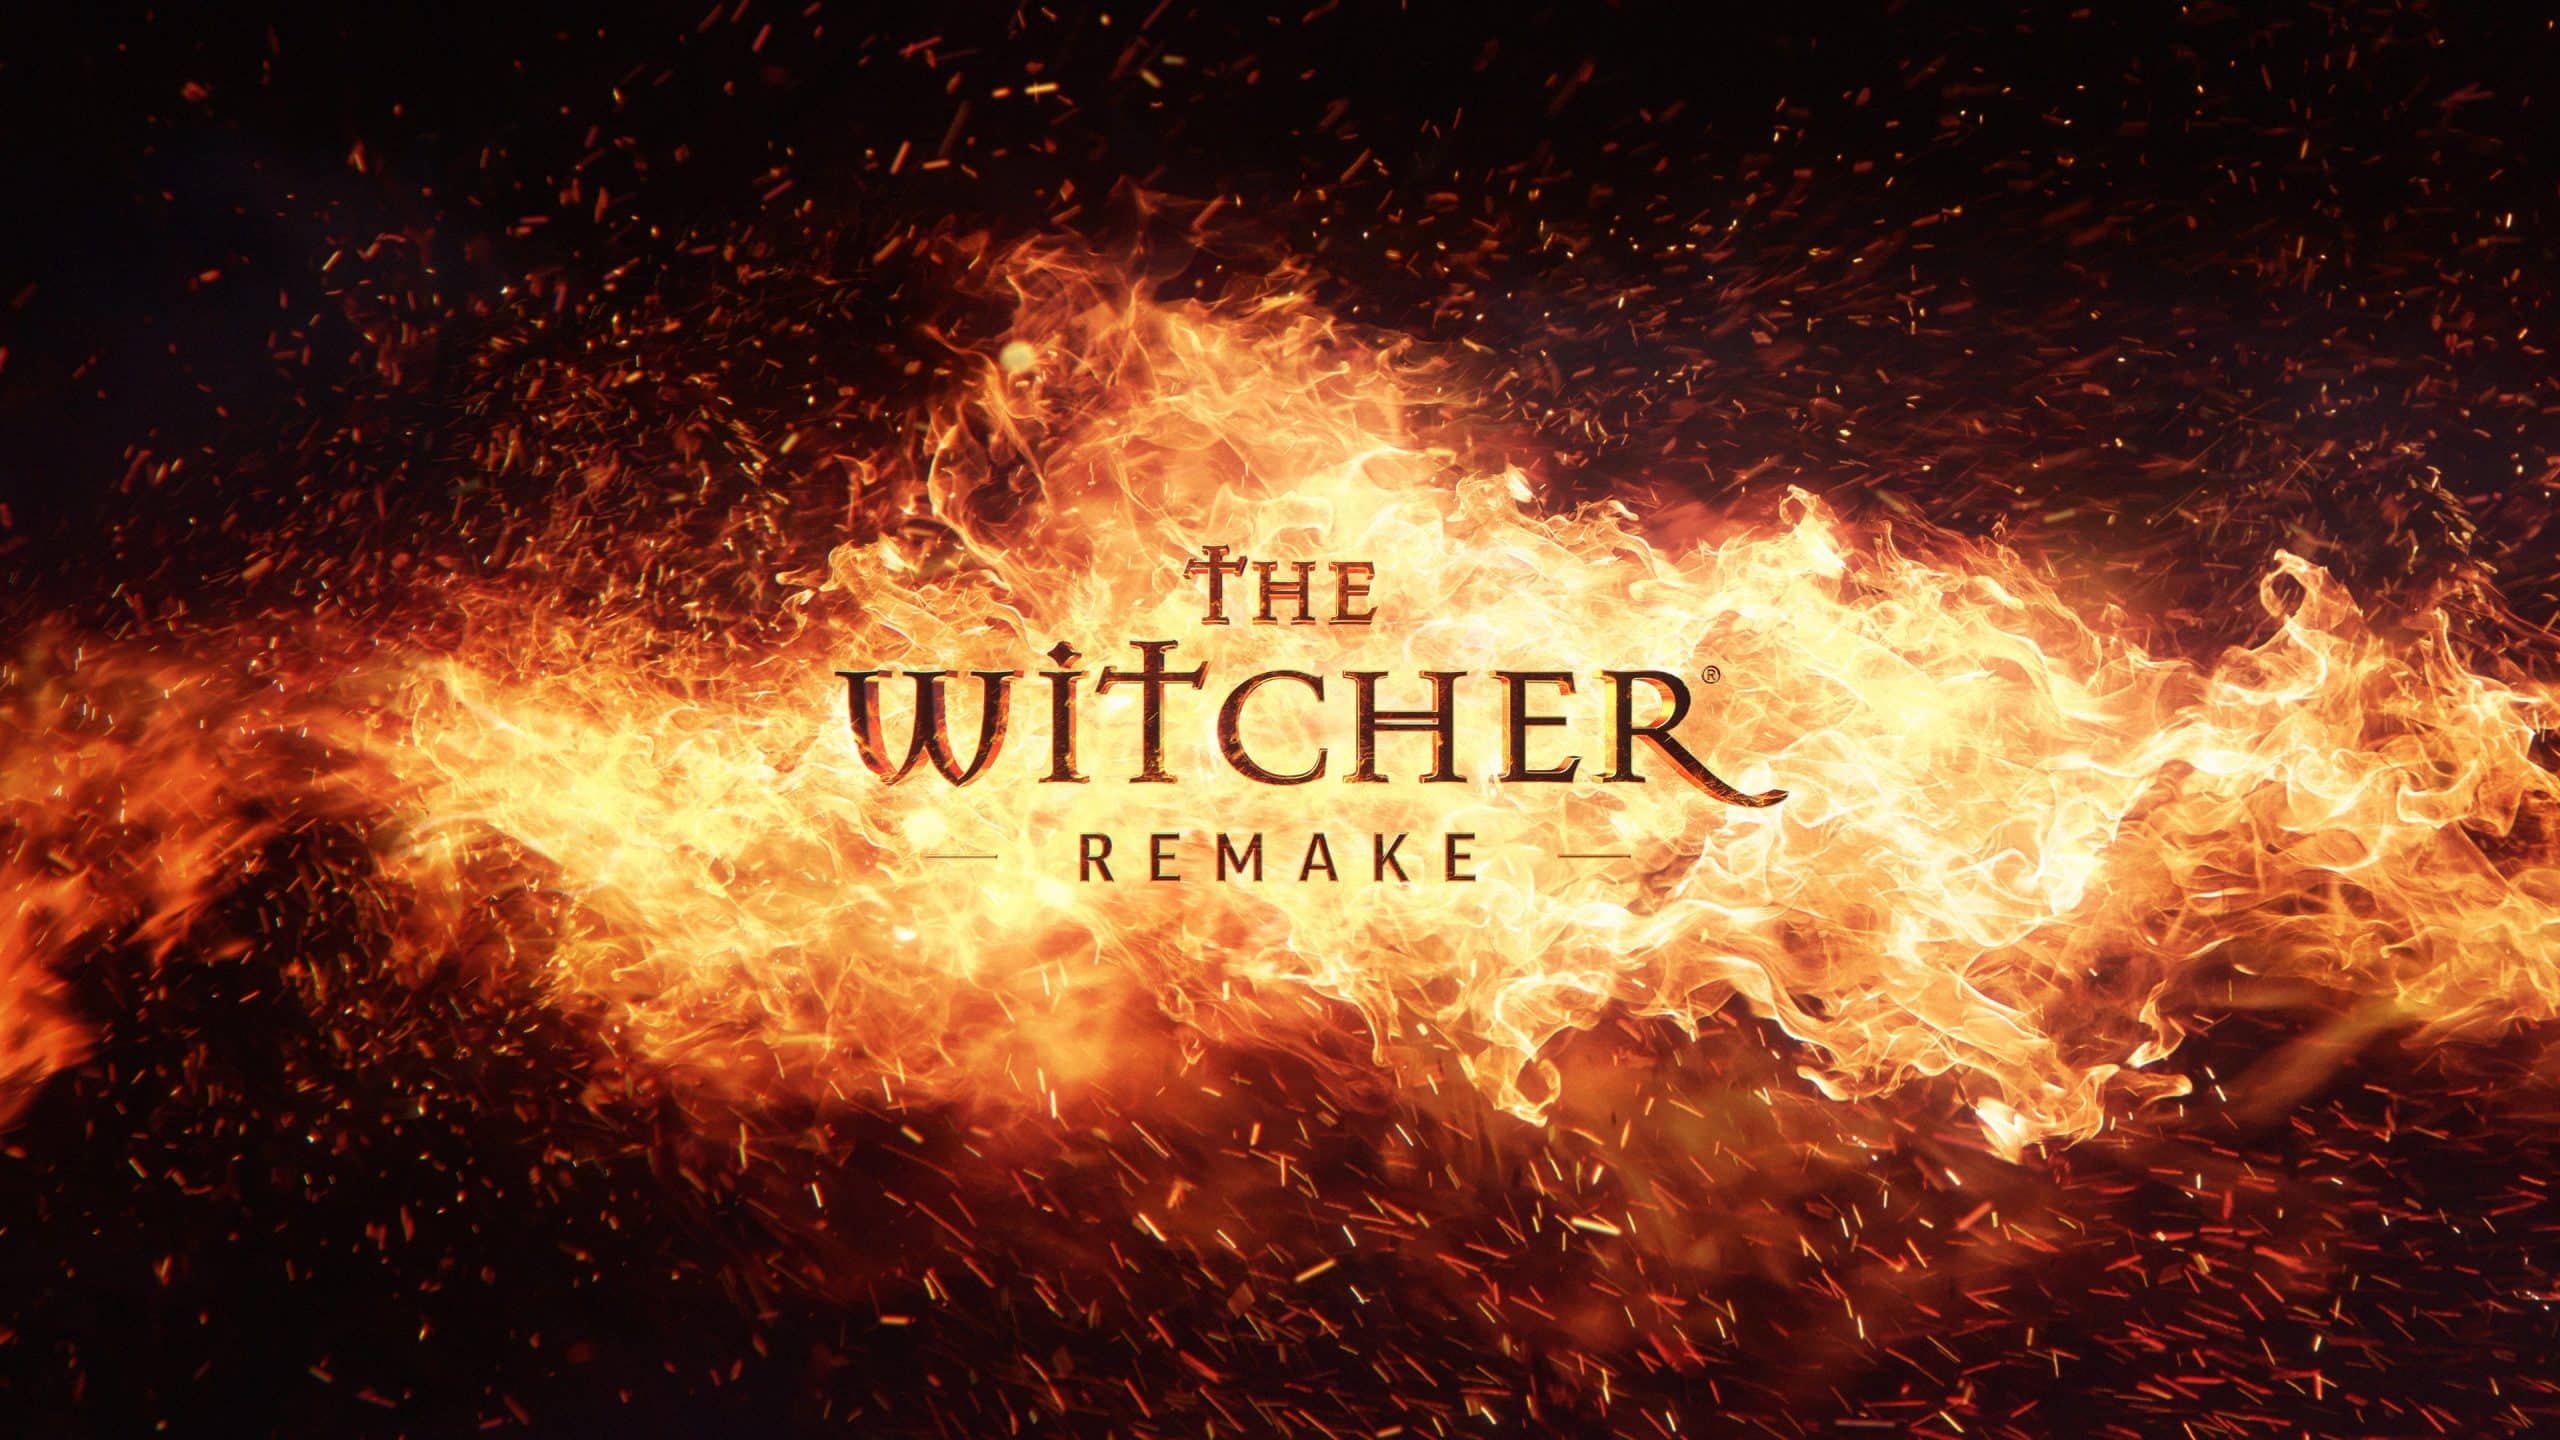 CD Projekt Red Confirms The Witcher Remake is in Development 1